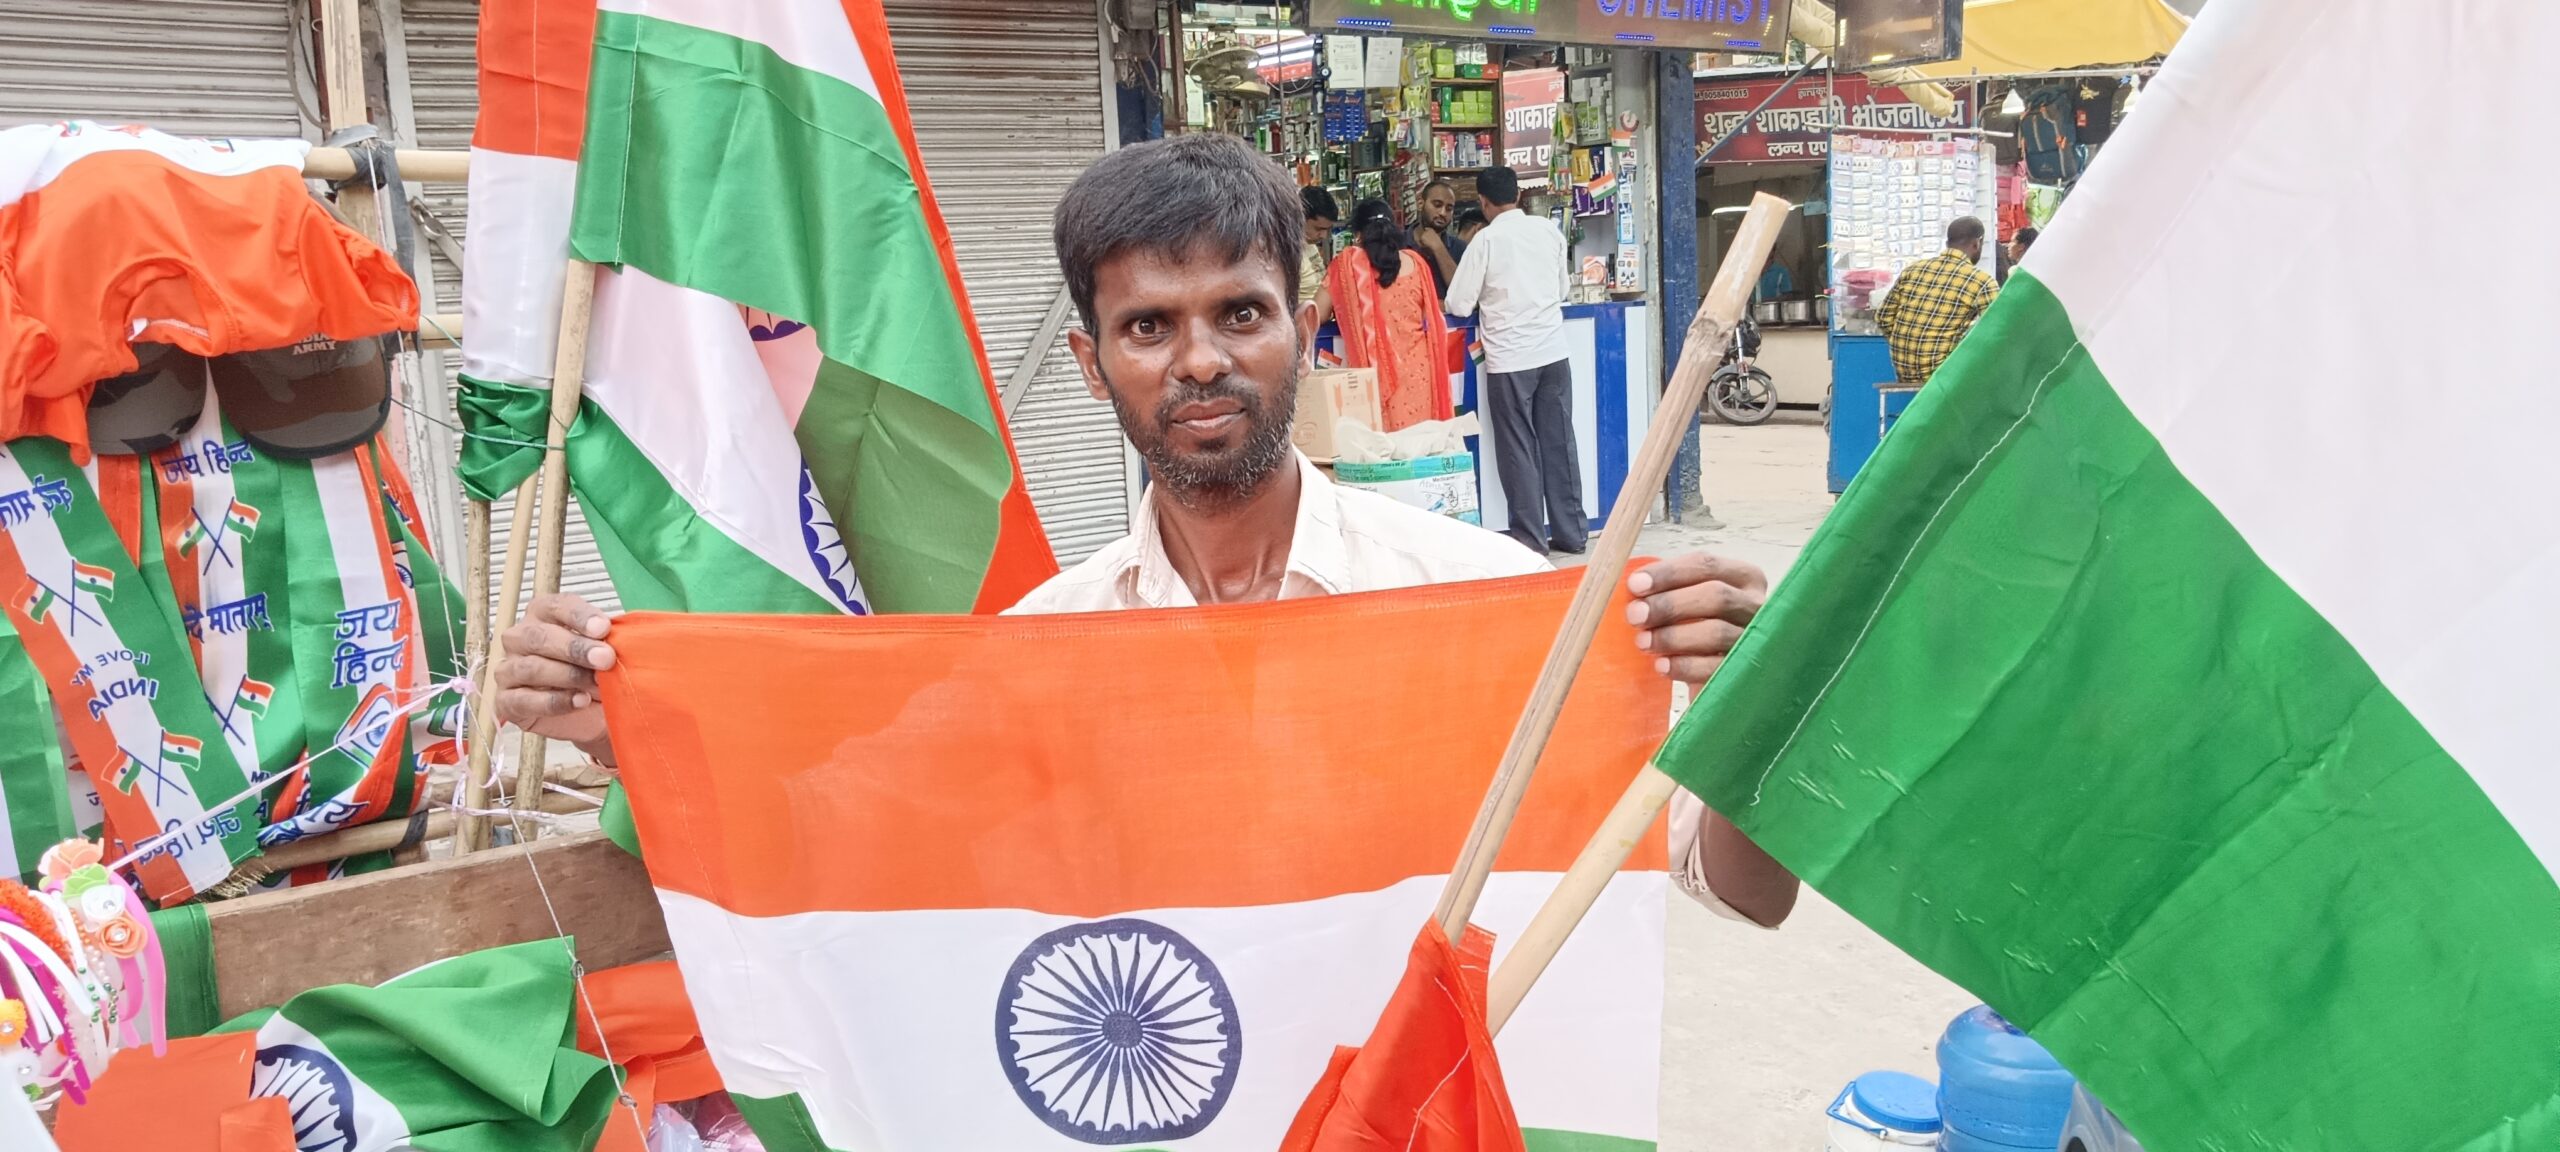 India’s 77th Independence Day: Blending patriotism with livelihood